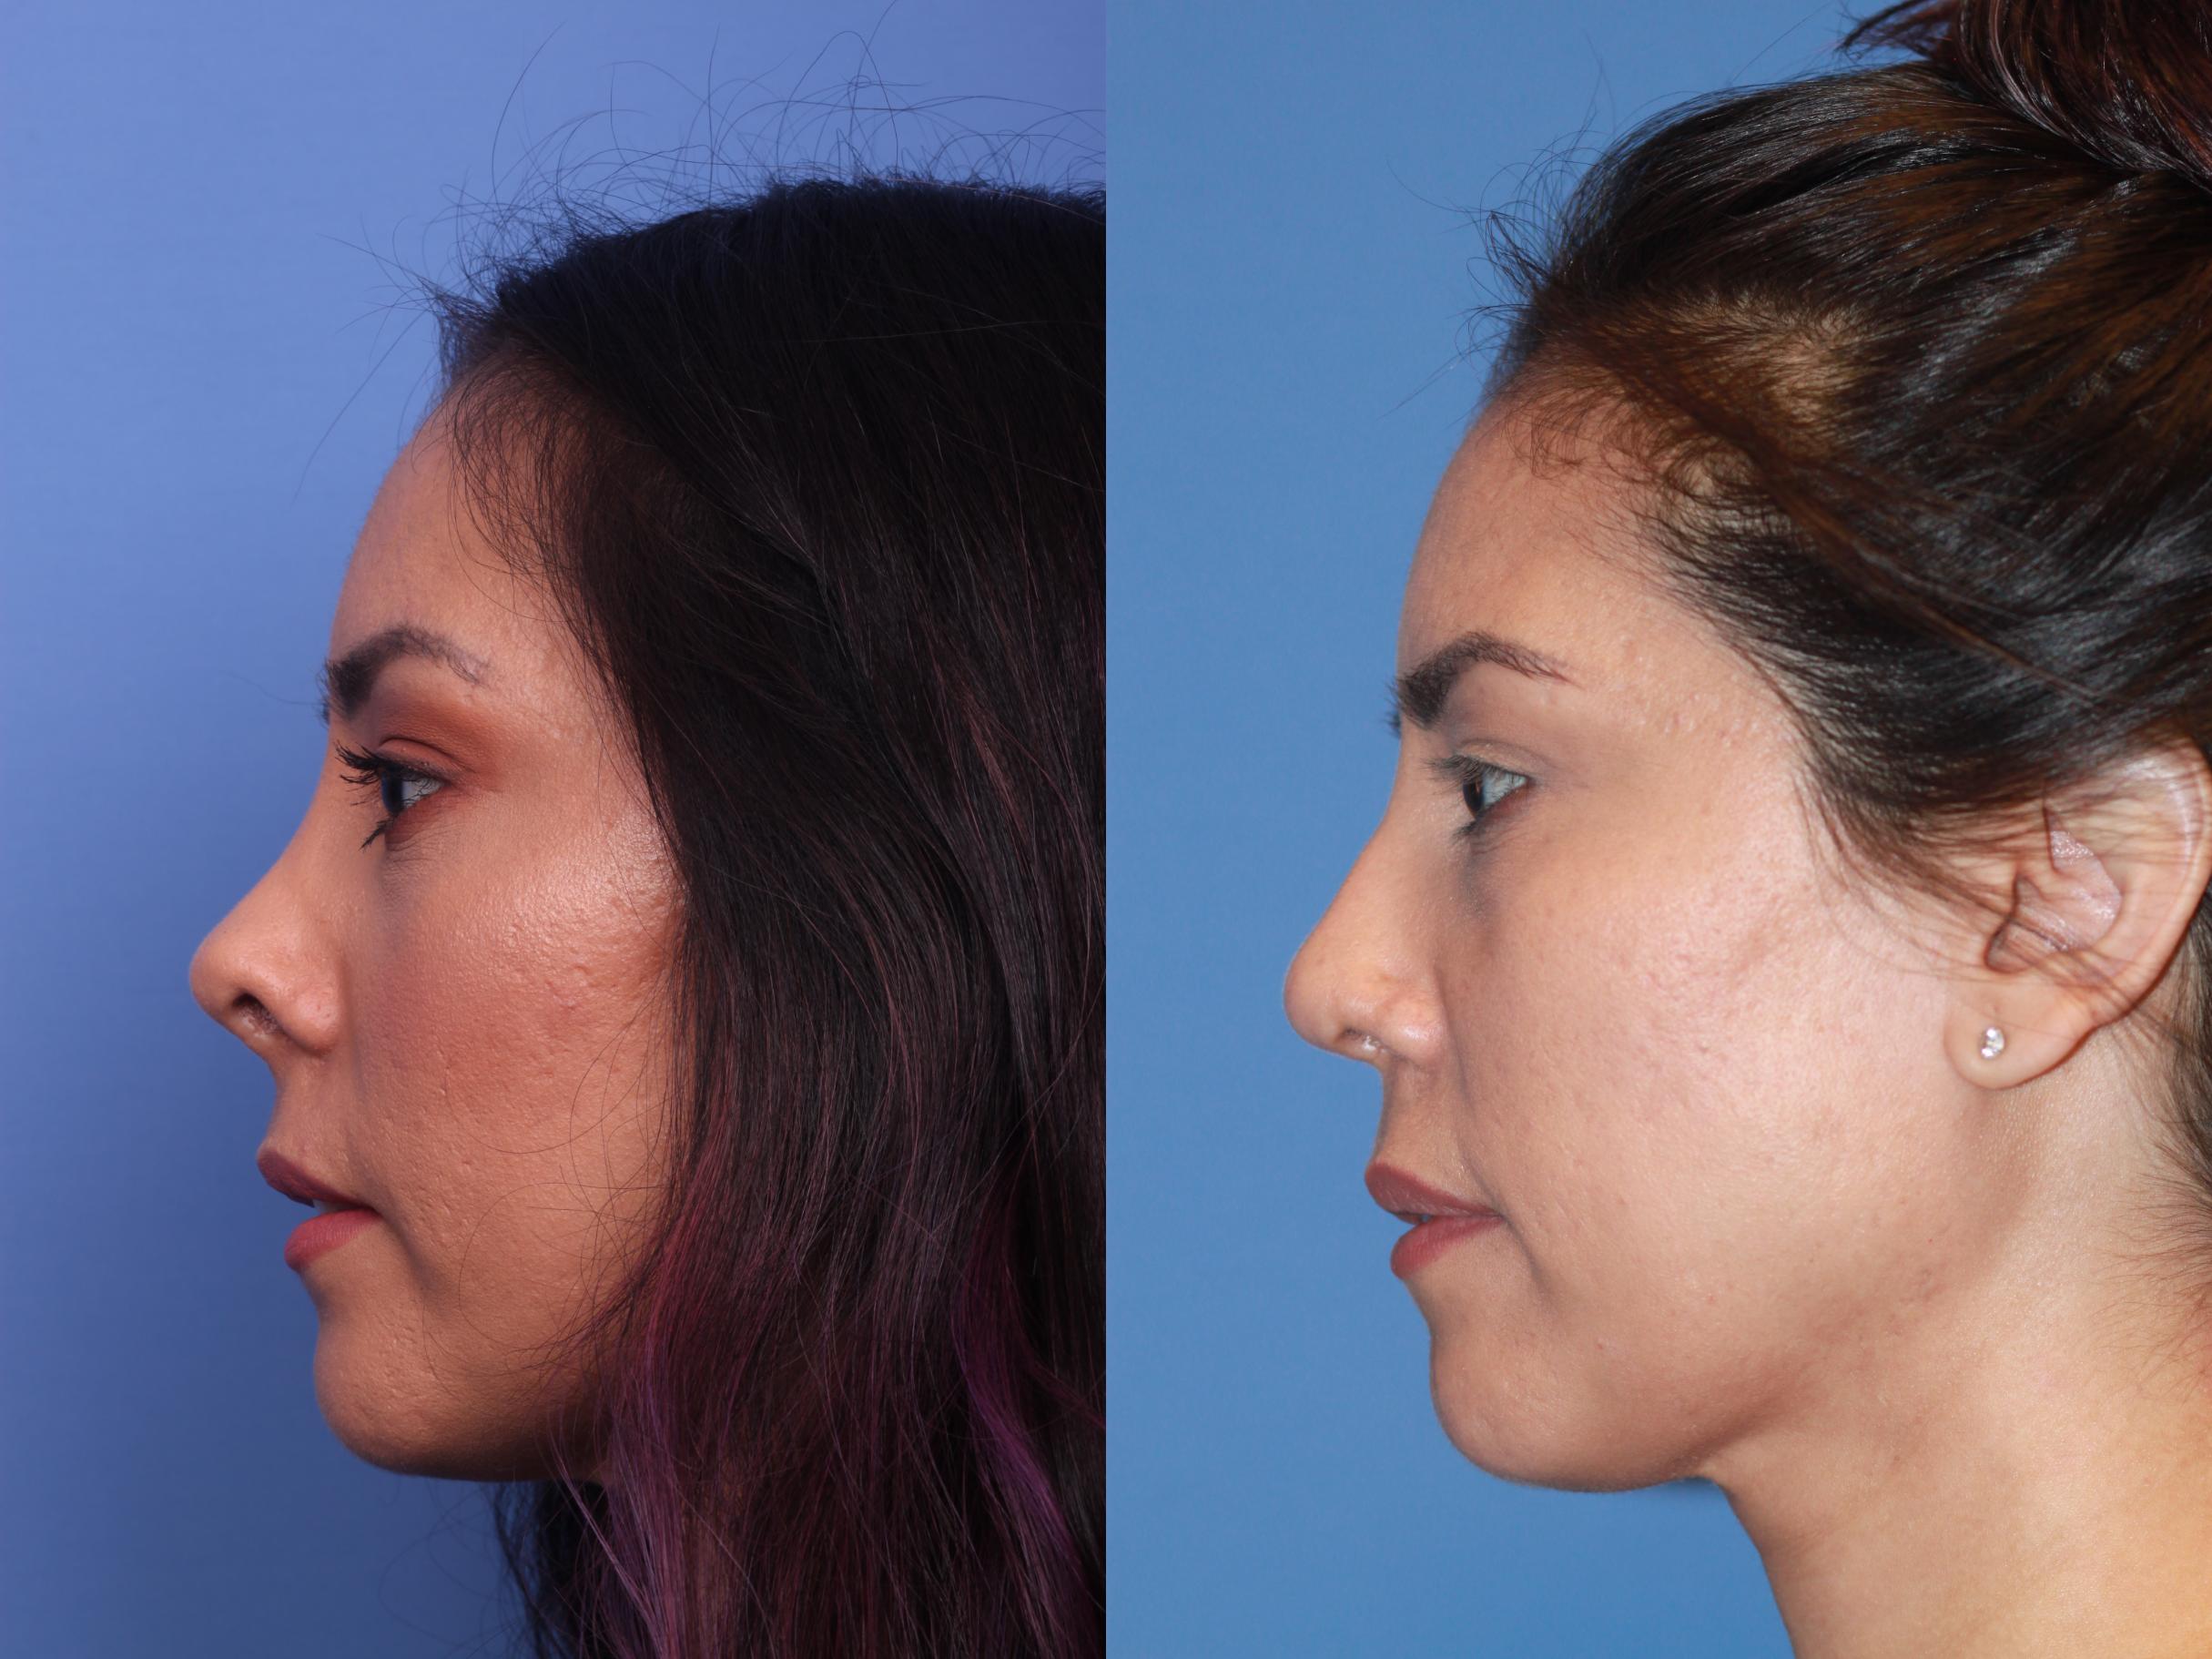 Rhinoplasty in Jackson, MS - Nose Reshaping Surgery - Faces